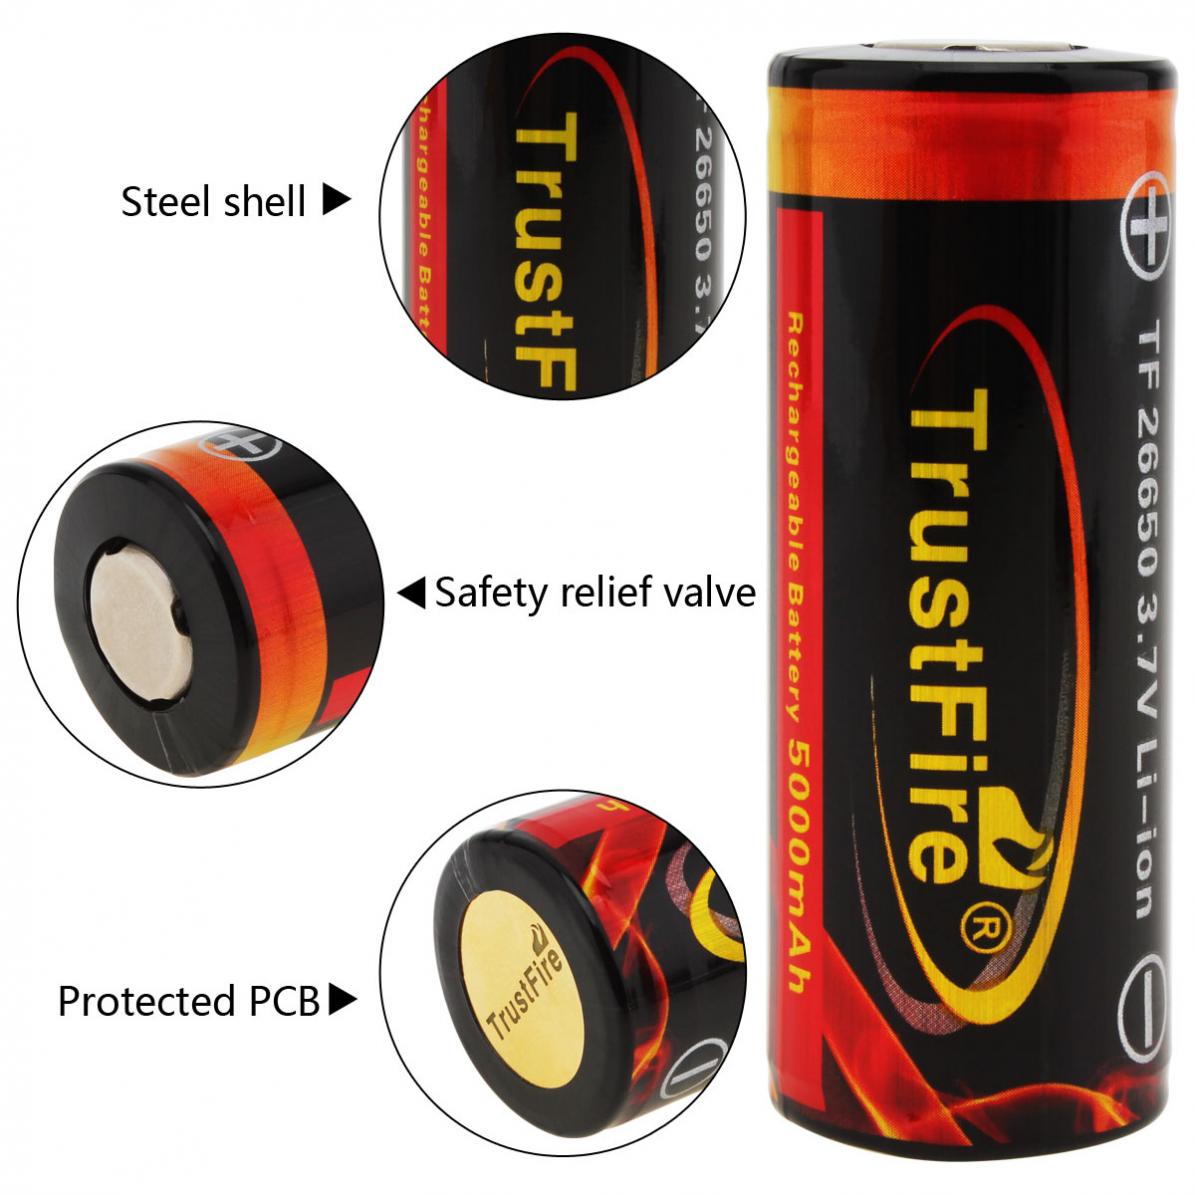 1Pc-TrustFire-37V-26650-High-Capacity-5000mAh-Li-ion-Rechargeable-Battery-With-Protected-PCB-for-LED-1454990